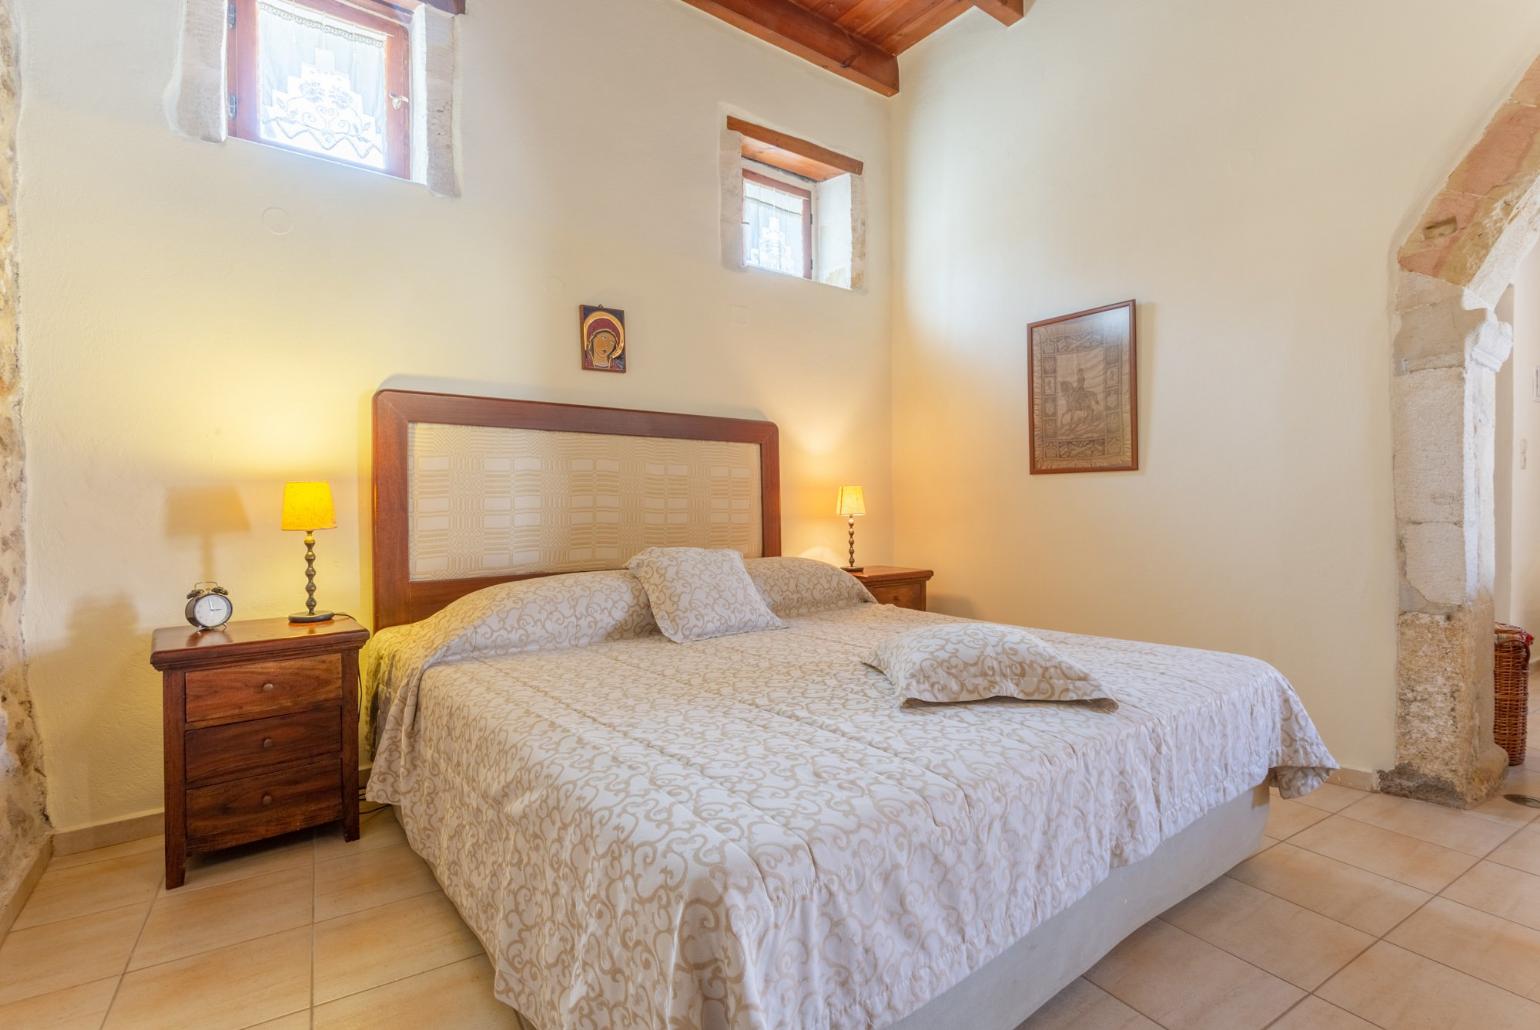 Double Bedroom Suite with en suite bathroom, living area, A/C, TV, and pool terrace access